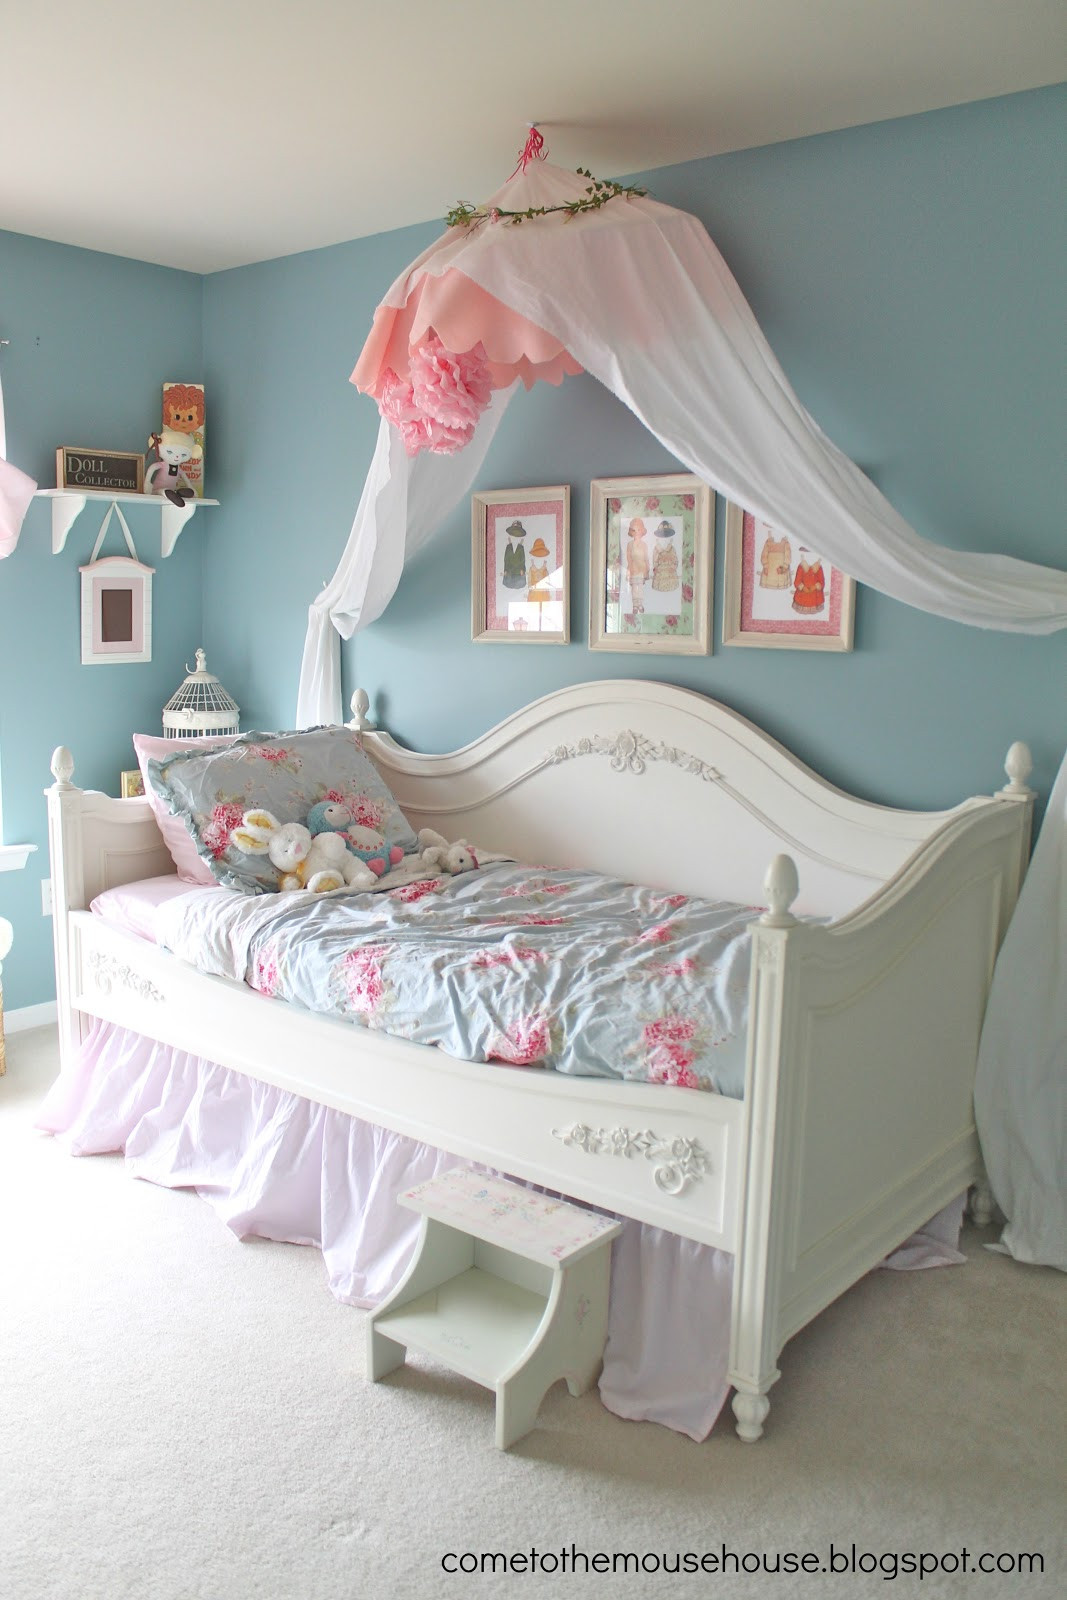 Shabby Chic Bedrooms Images
 Shabby Chic Bedroom Reveal wel etothemousehouse